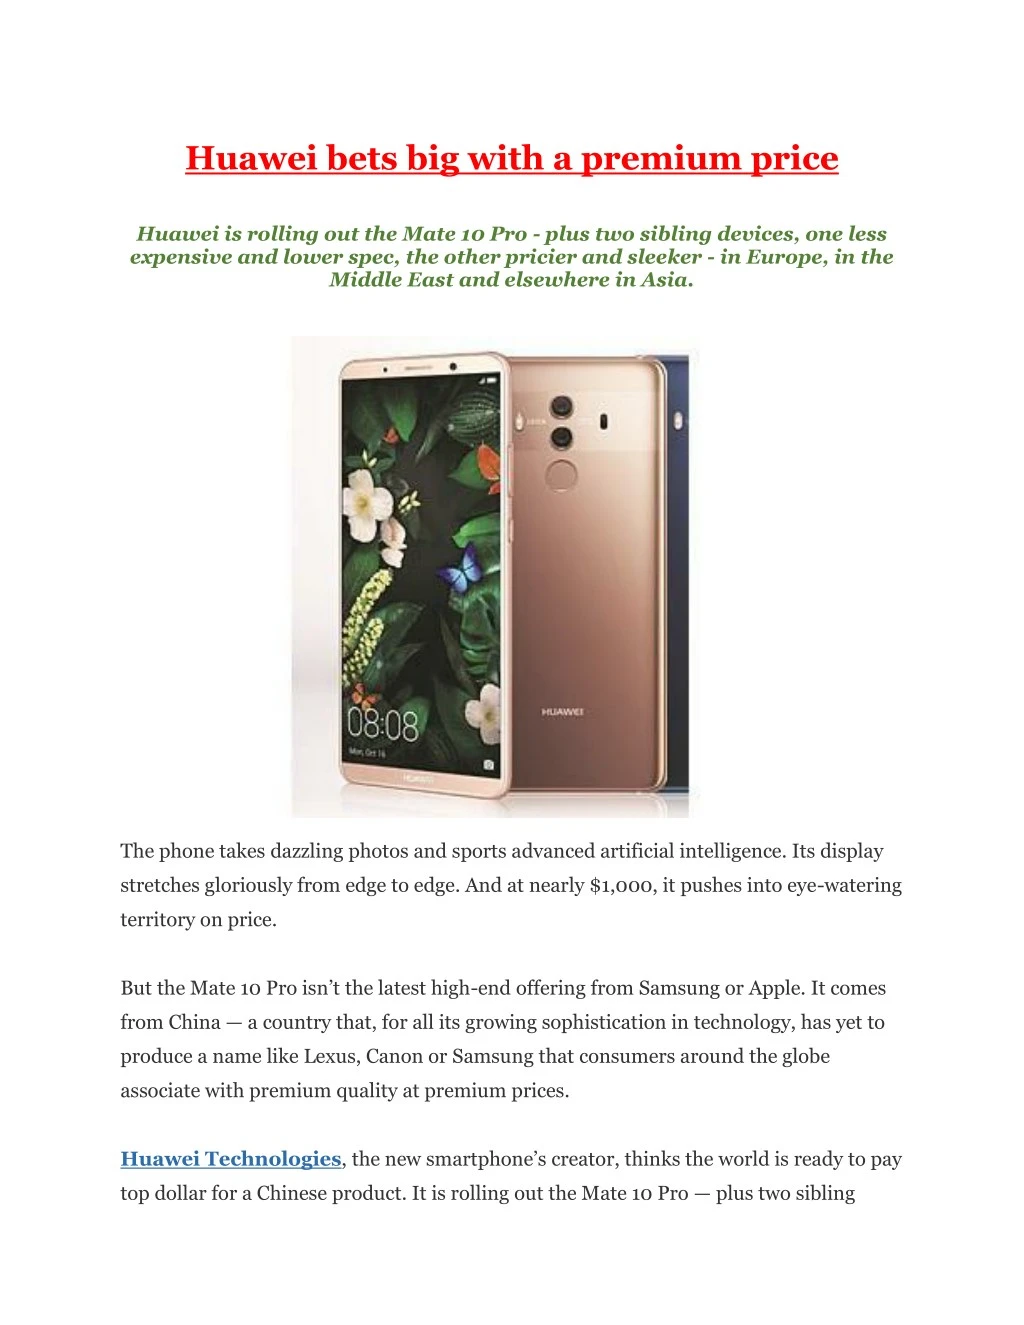 huawei bets big with a premium price